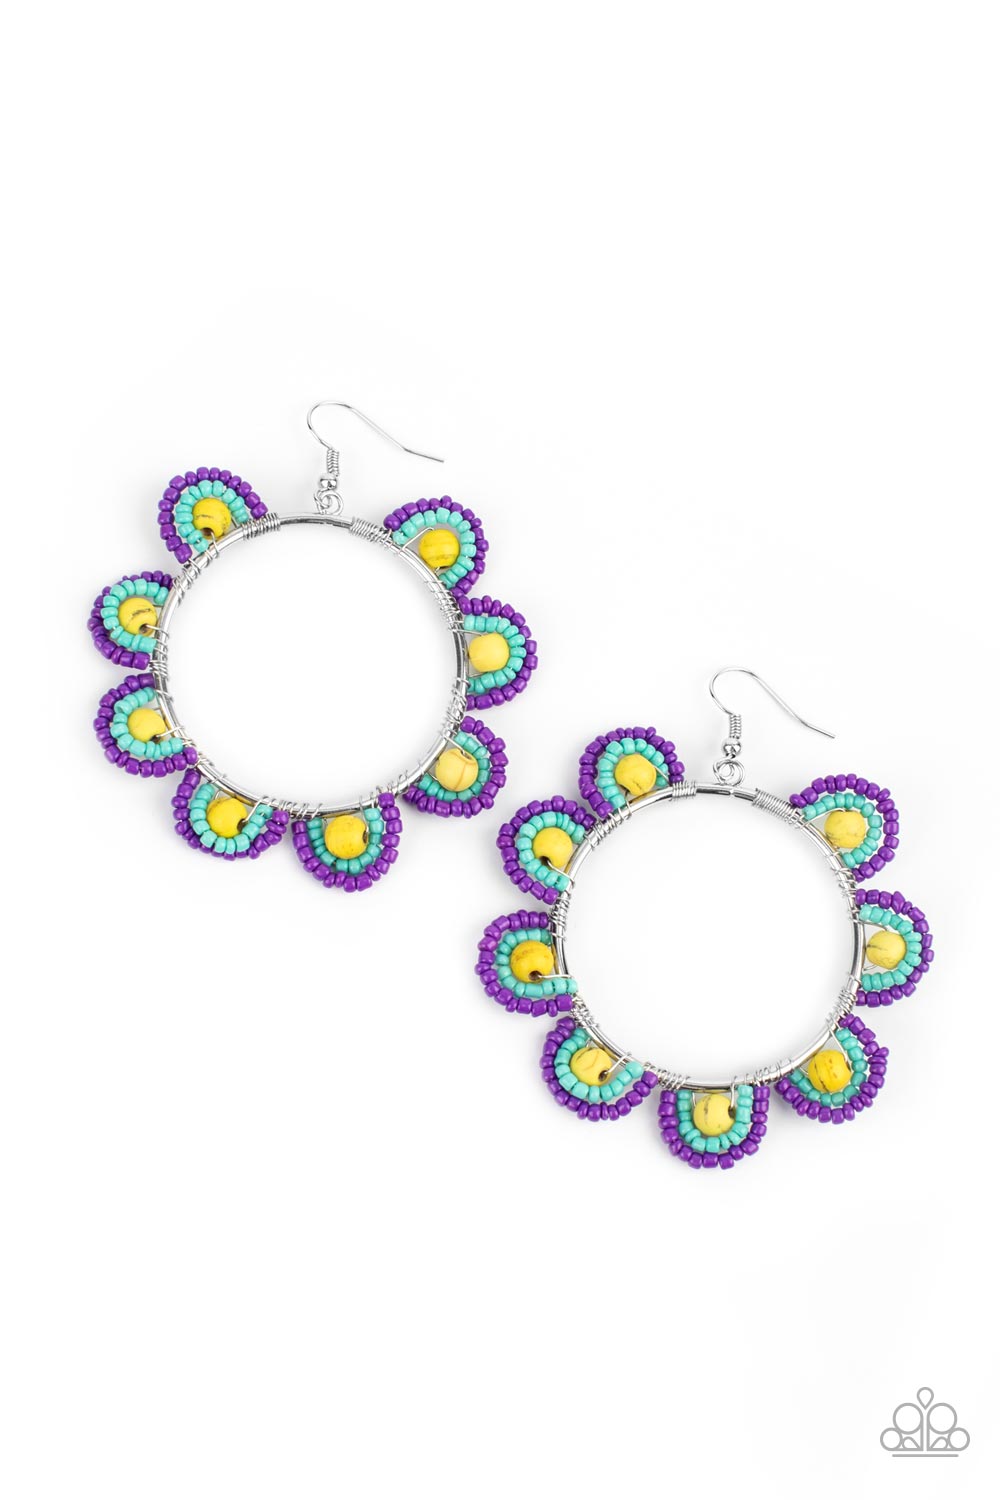 Paparazzi Groovy Gardens - Yellow Seedbead Earrings infused with sunny yellow stone bead centers, rows of purple and turquoise seed beads are threaded along dainty wires along the outside of a shiny silver hoop for a vivacious floral look. Earring attaches to a standard fishhook fitting.  Sold as one pair of earrings.